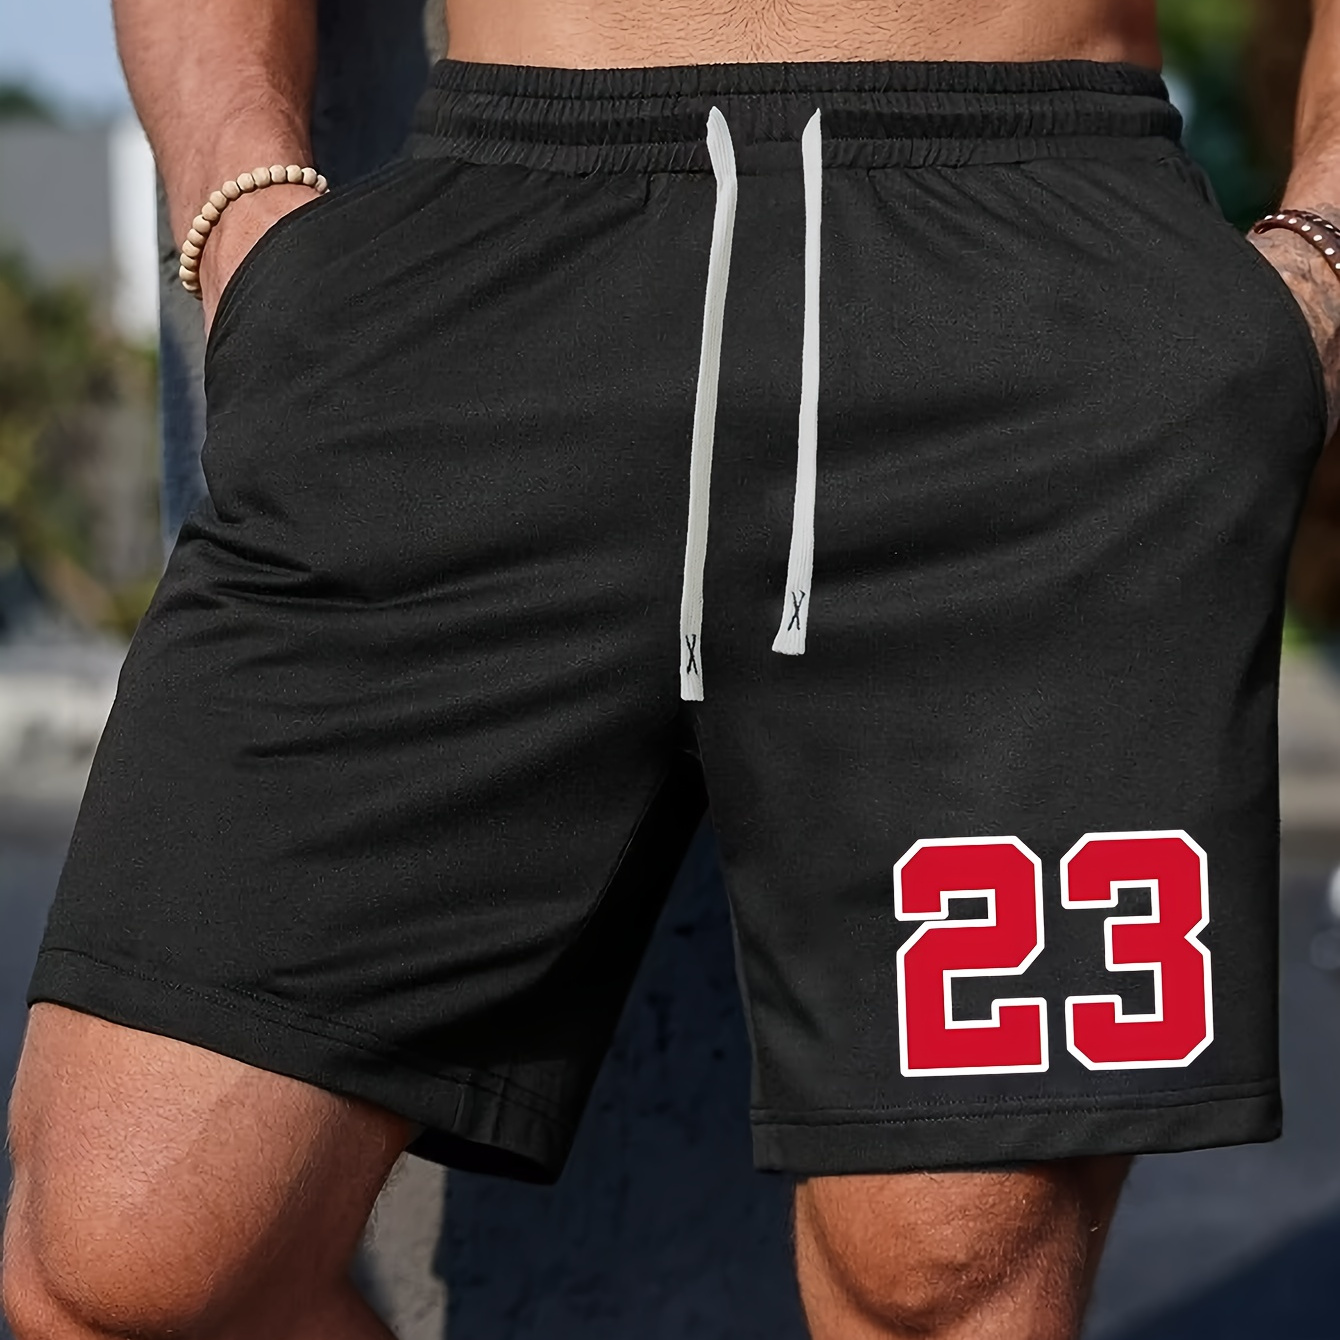 

Plus Size Men's Drawstring Shorts, Number 23 Print Casual Comfy Active Shorts, Summer Trendy Clothing For Big & Tall Guys, Outdoor Sports